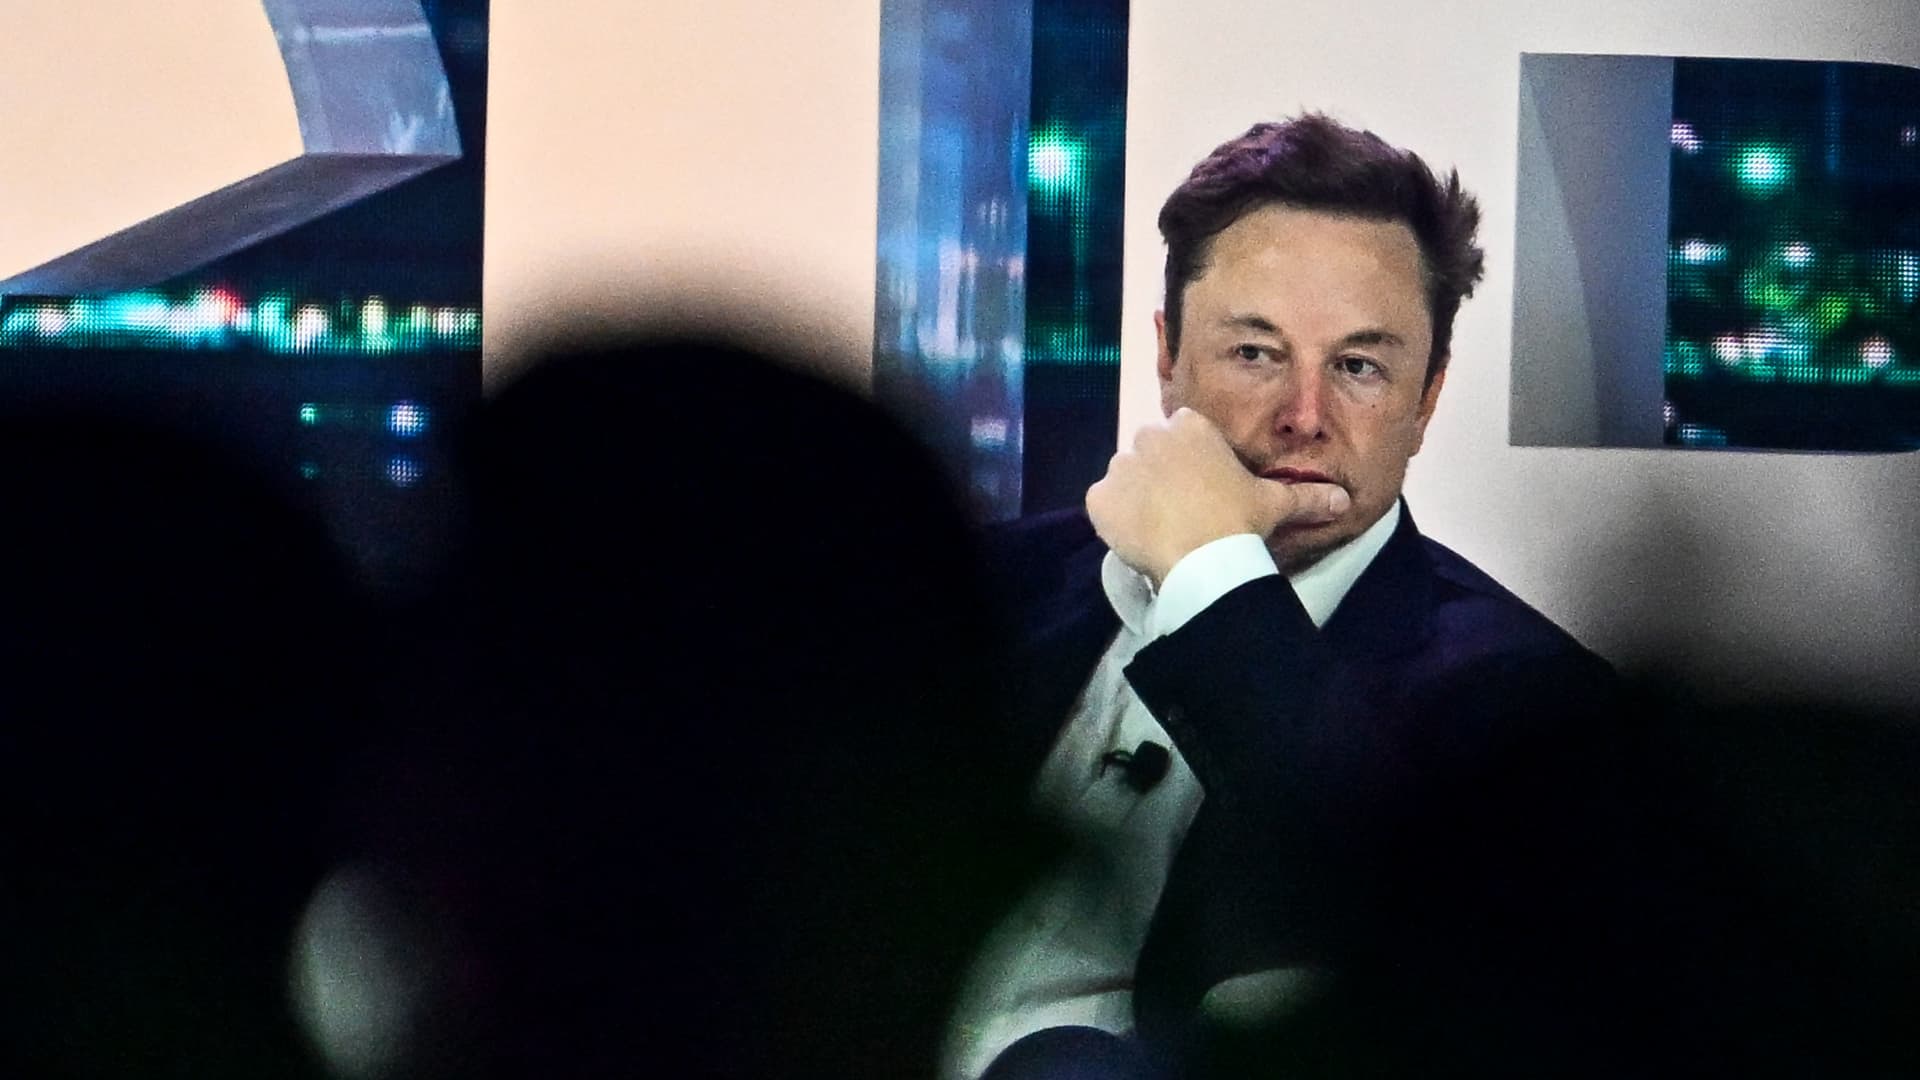 Musk met with Schumer and other lawmakers to discuss A.I. regulation